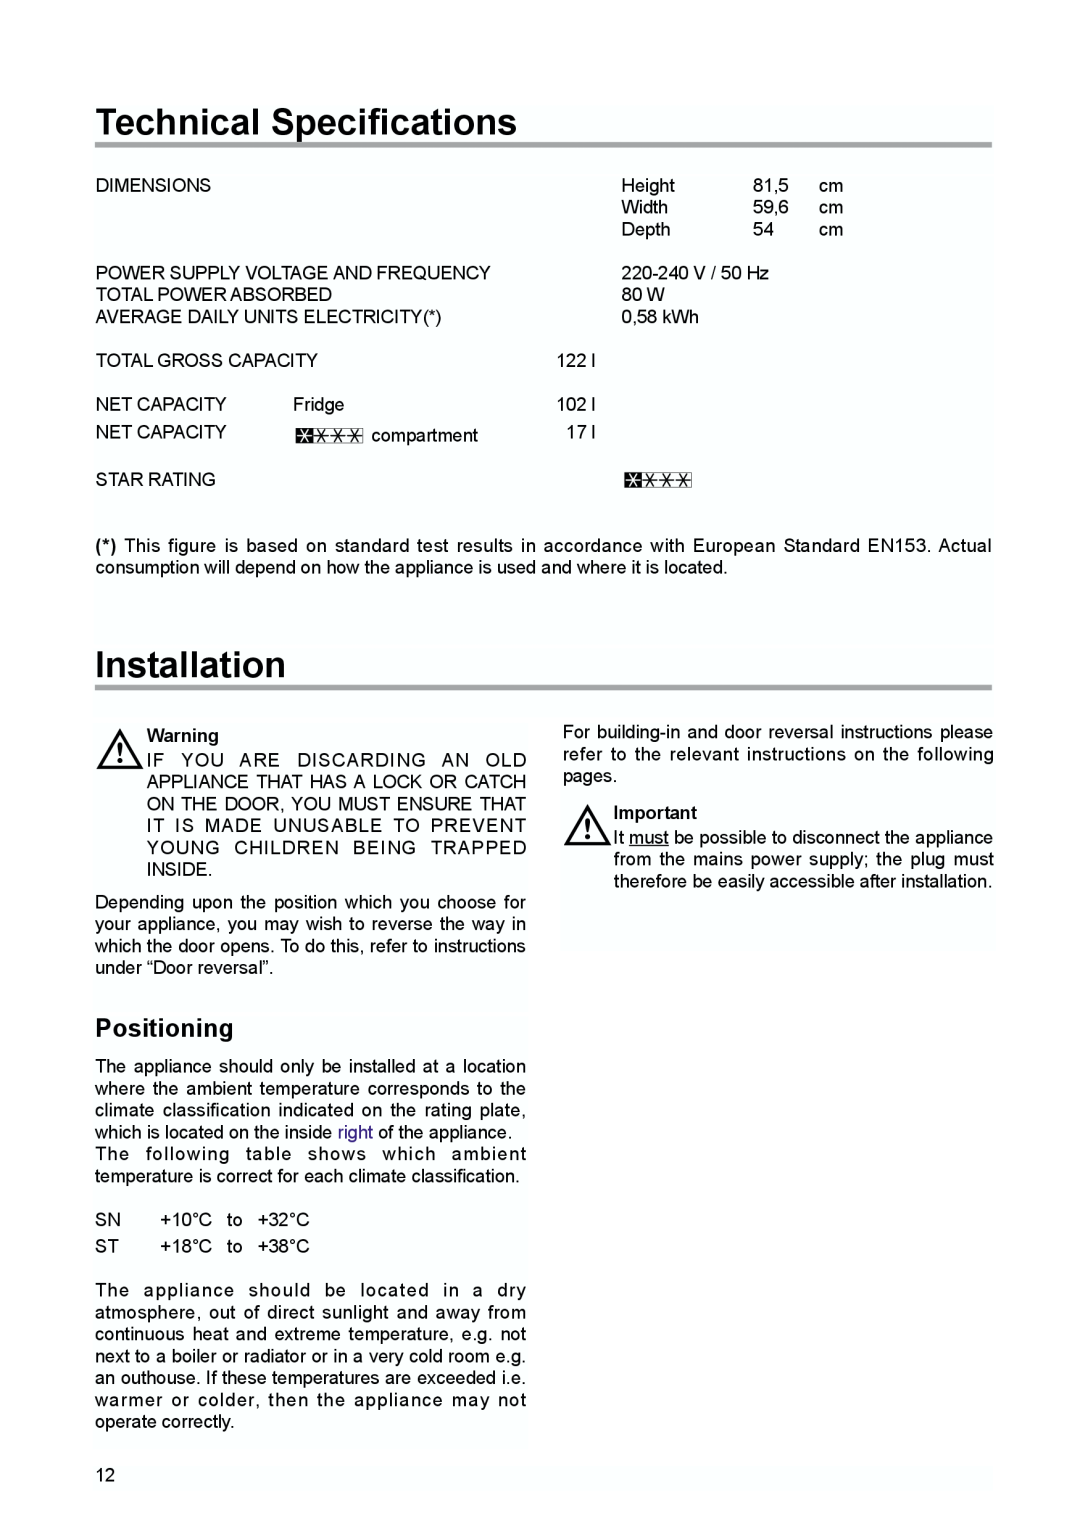 Zanussi ZUD 9124 A manual Technical Specifications, Installation, Positioning 